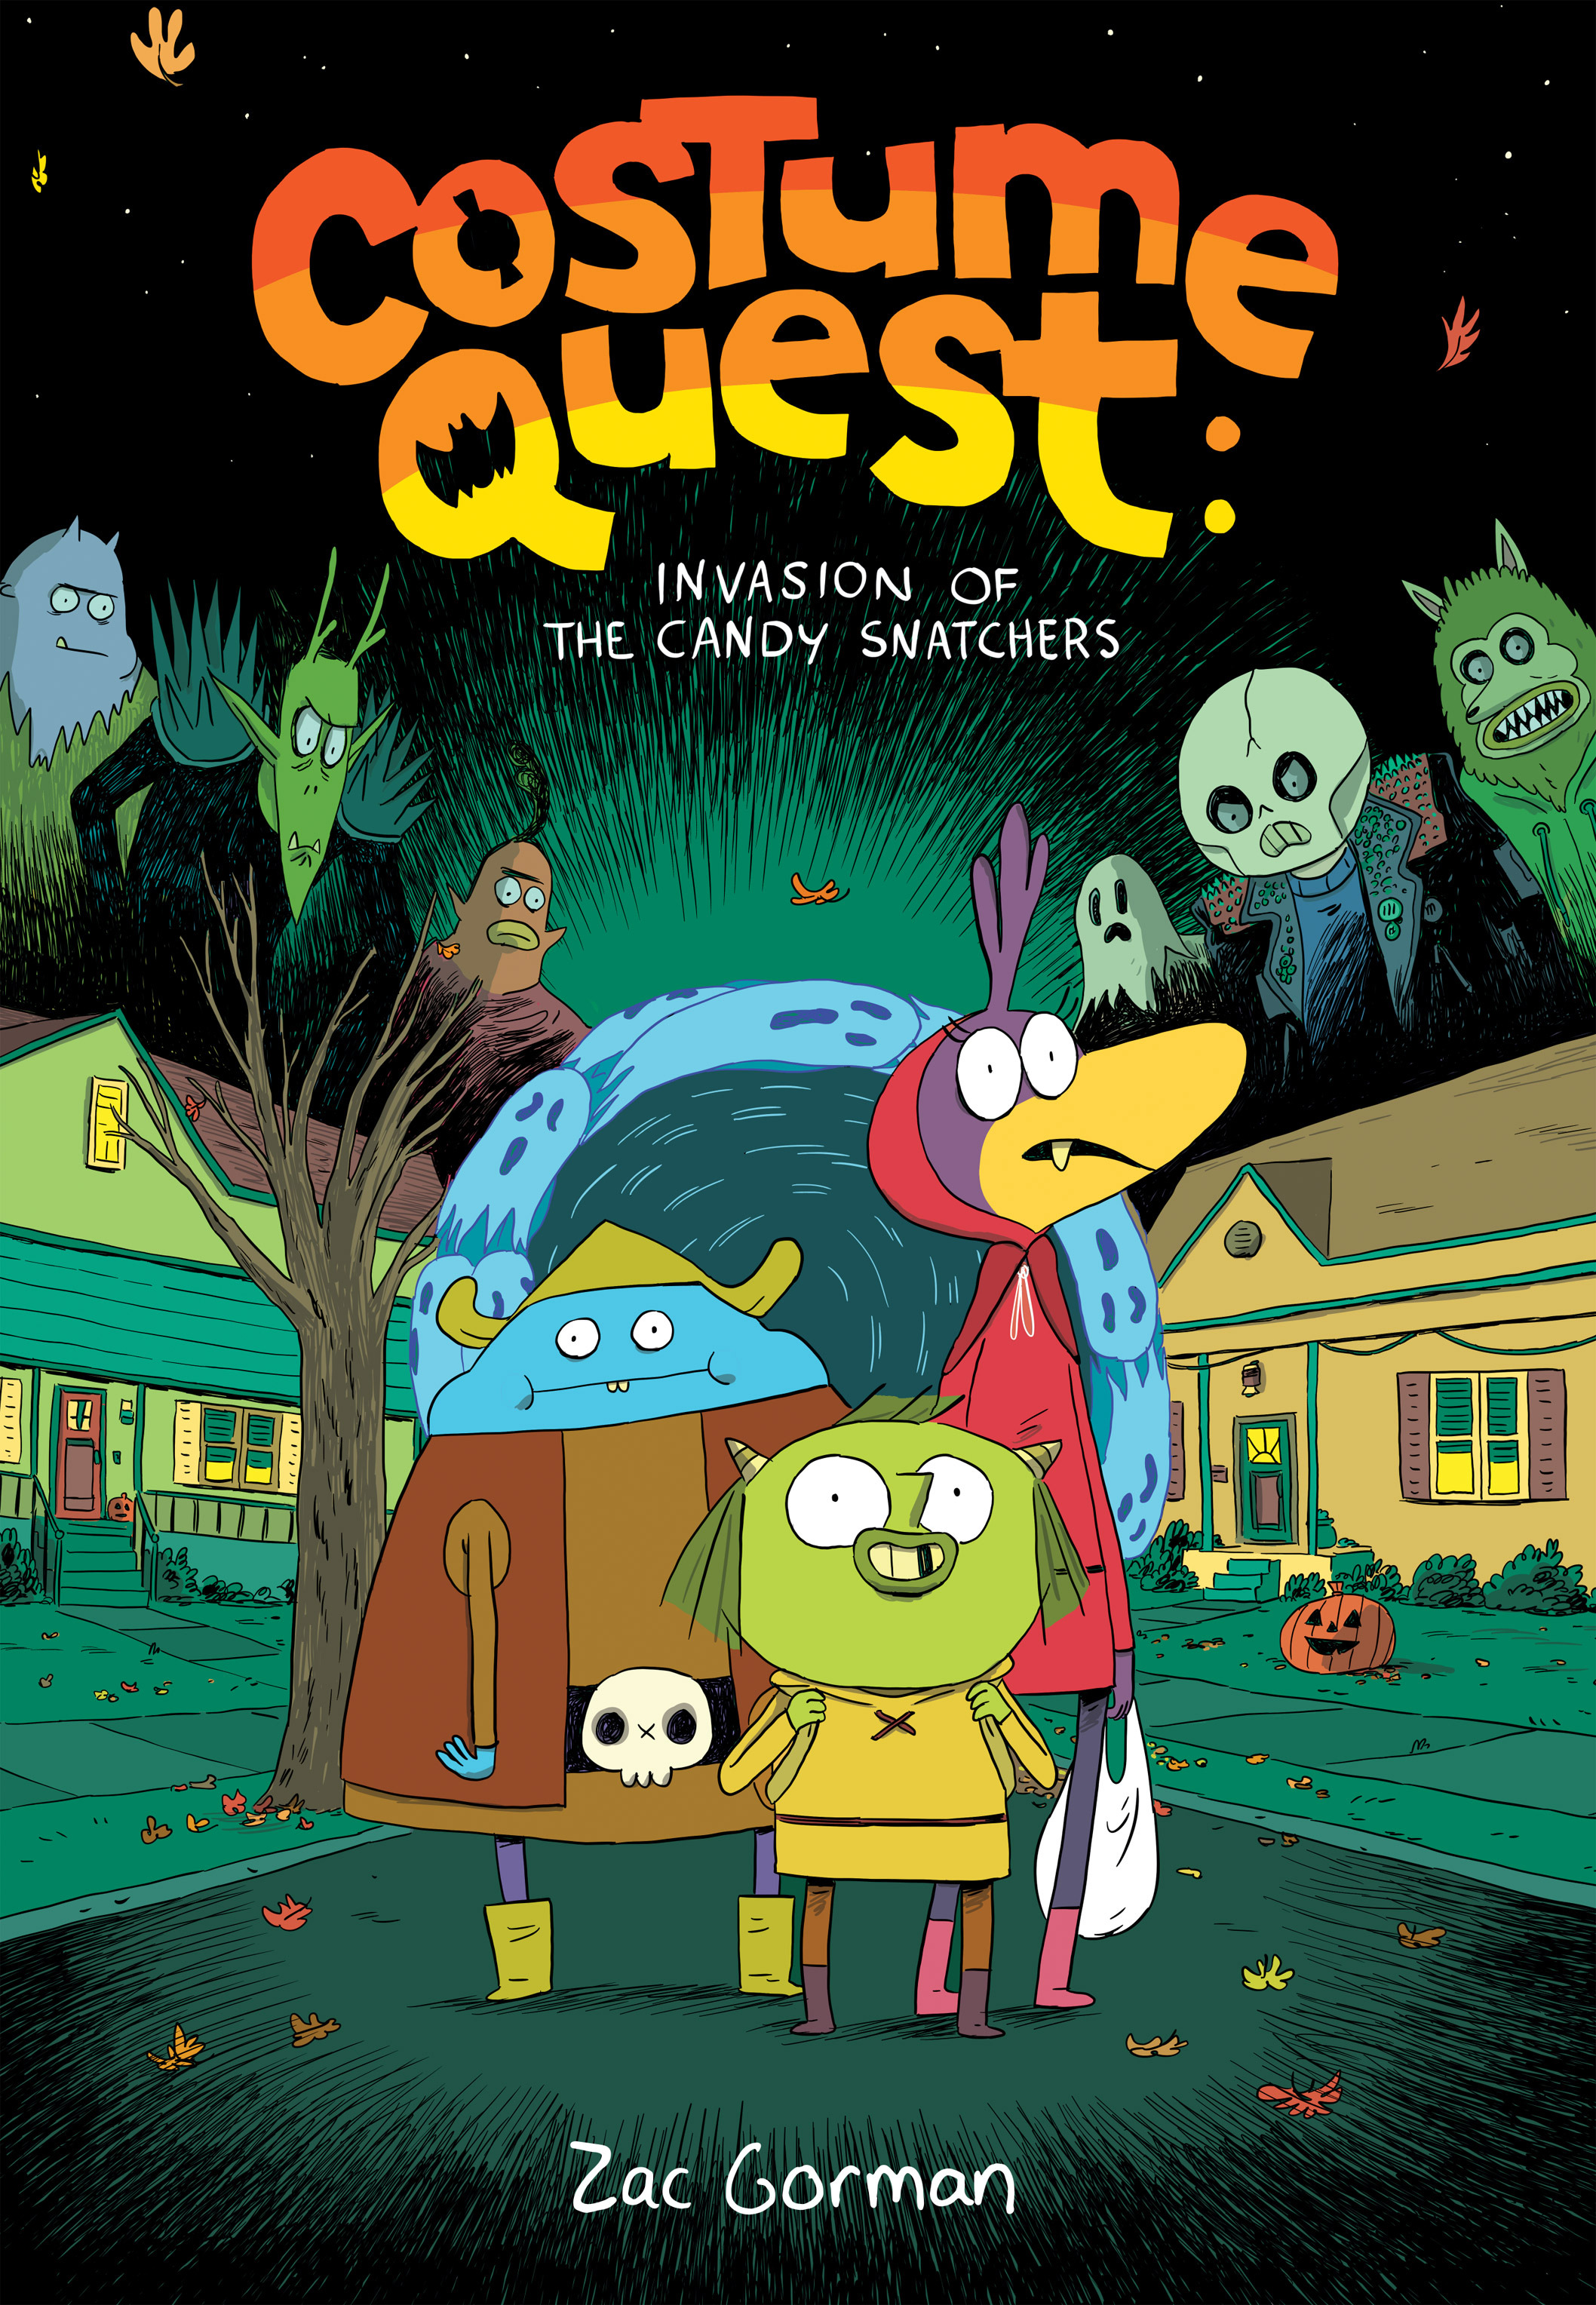 Read online Costume Quest: Invasion of the Candy Snatchers comic -  Issue # Full - 1